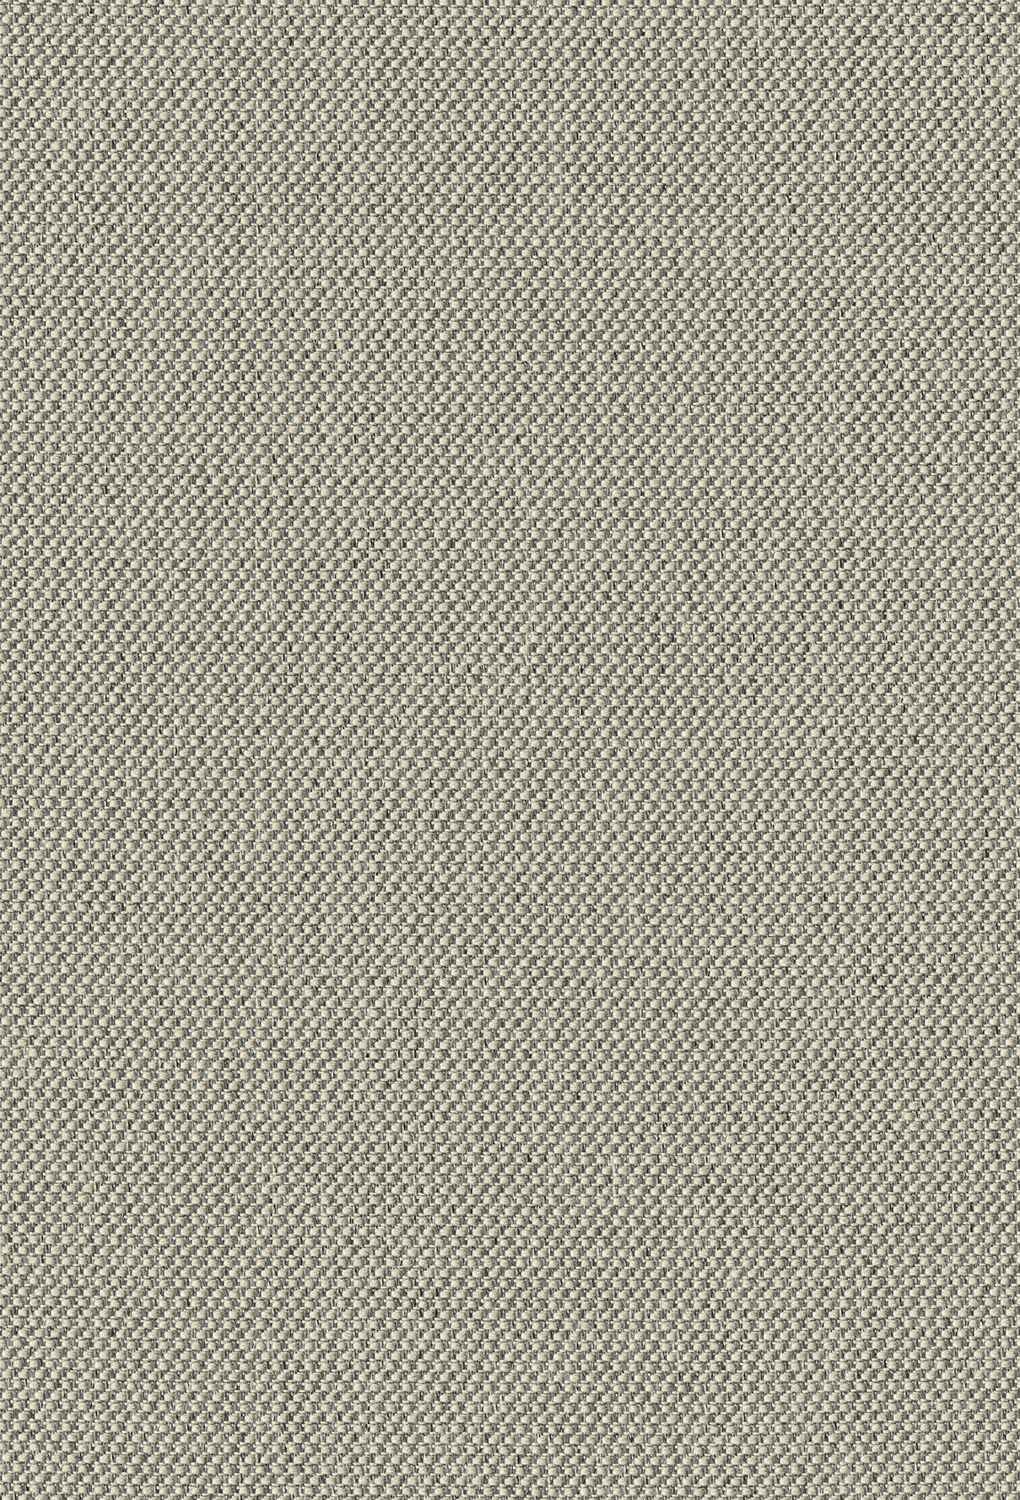 Biotope - Salt Marsh - 4113 - 06 Tileable Swatches